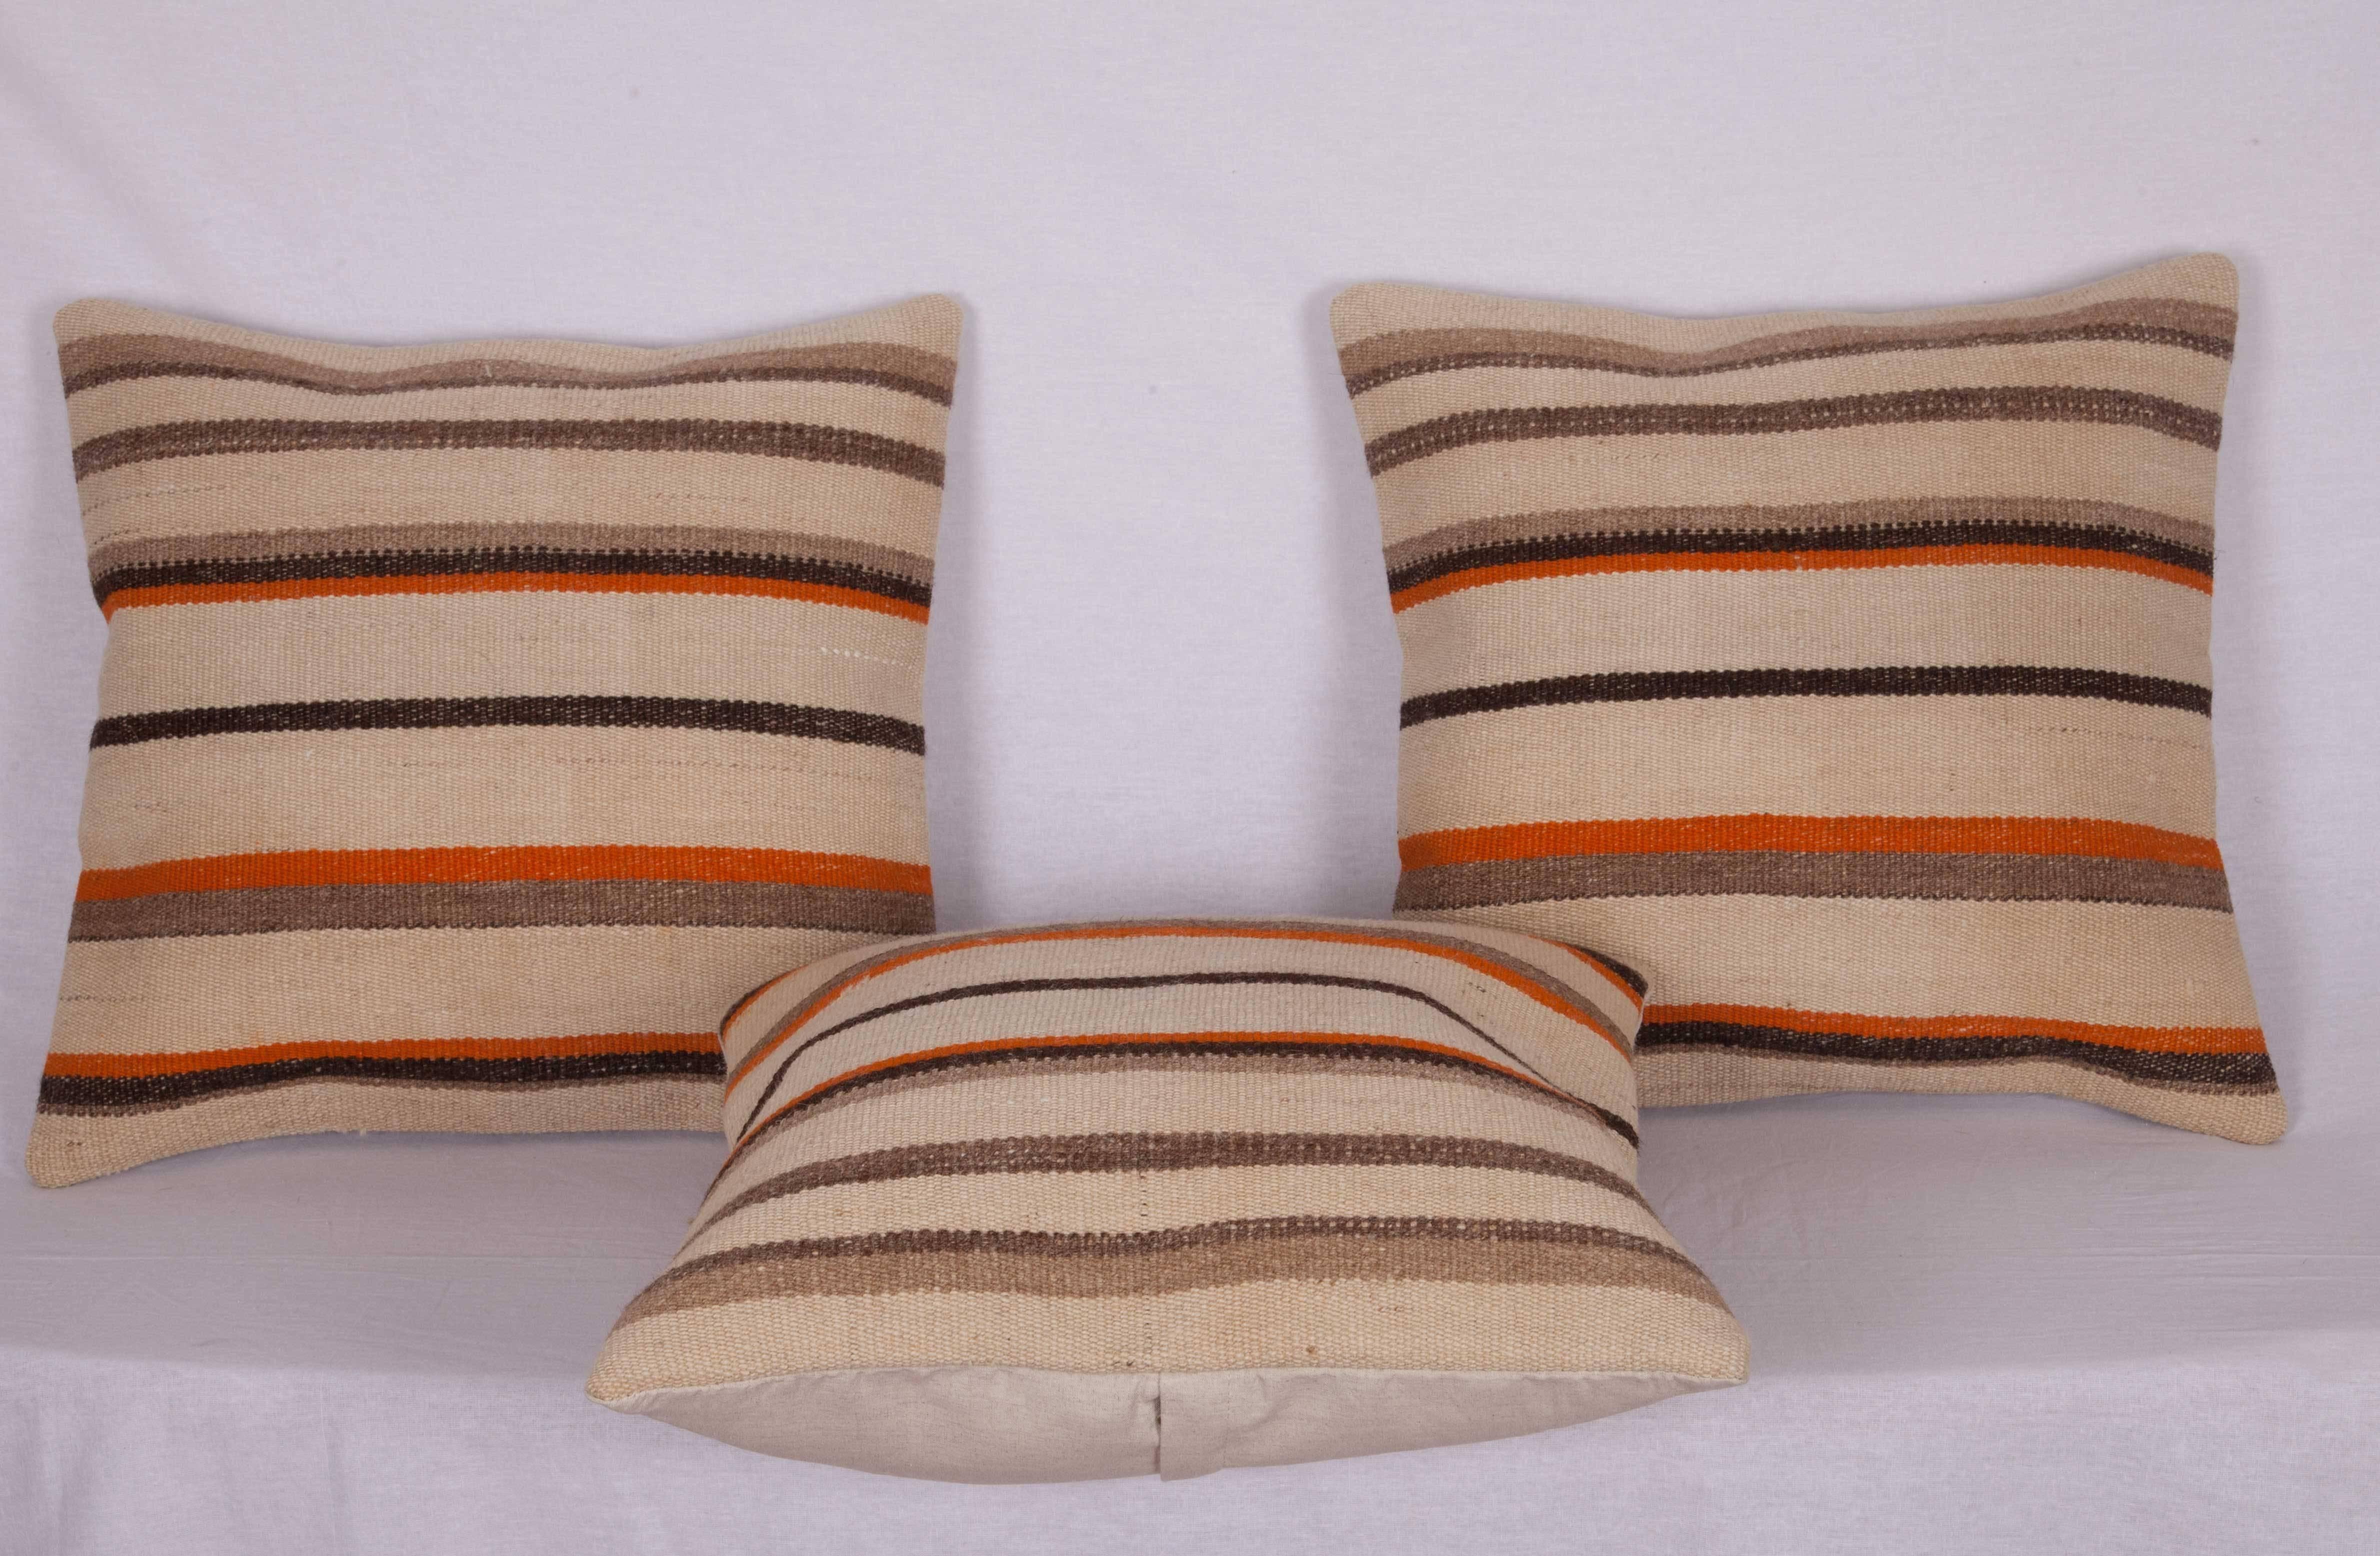 The pillow cases are made out of a mid-20th century, Turkish wool Kilim. They do not come with an insert but they come with a bag made to the size and out of cotton to accommodate the filling. The backing is made of linen. Please note filling is not